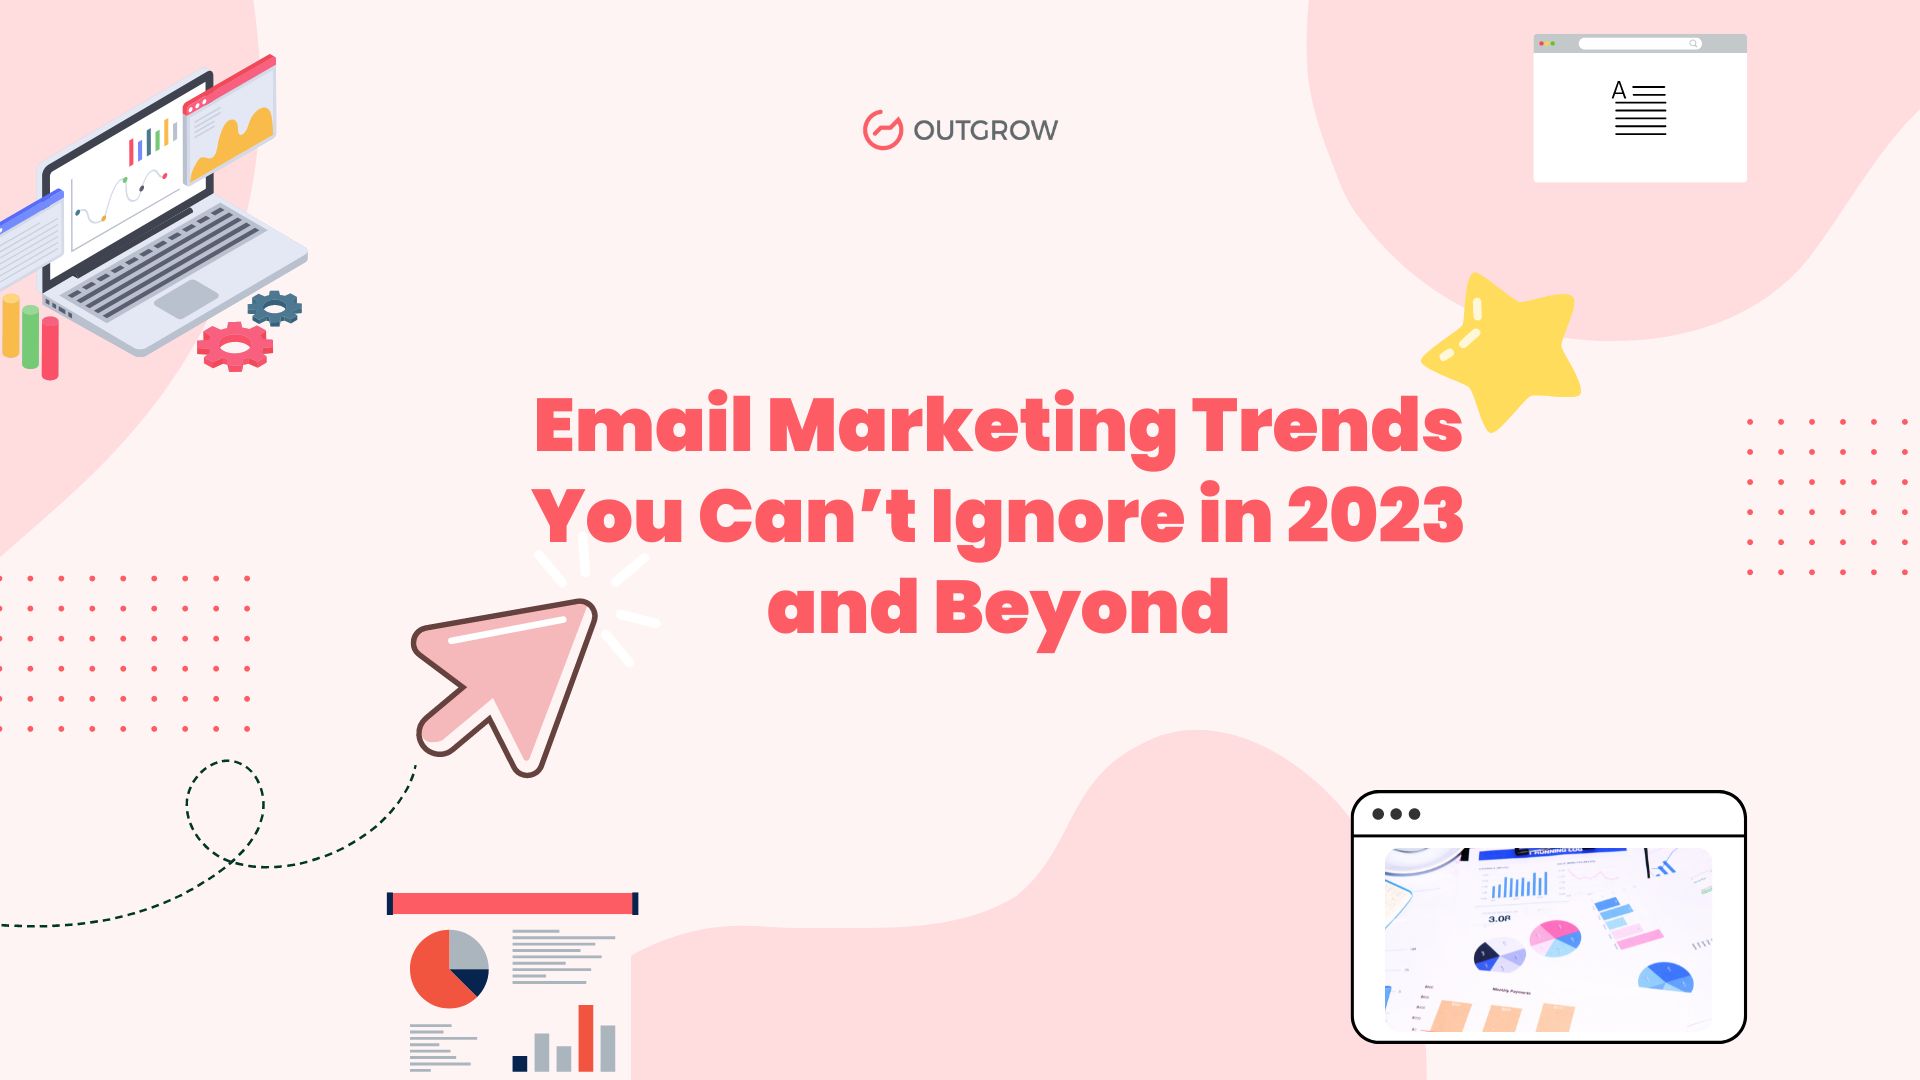 Email Marketing Trends You Can’t Ignore in 2023 and Beyond